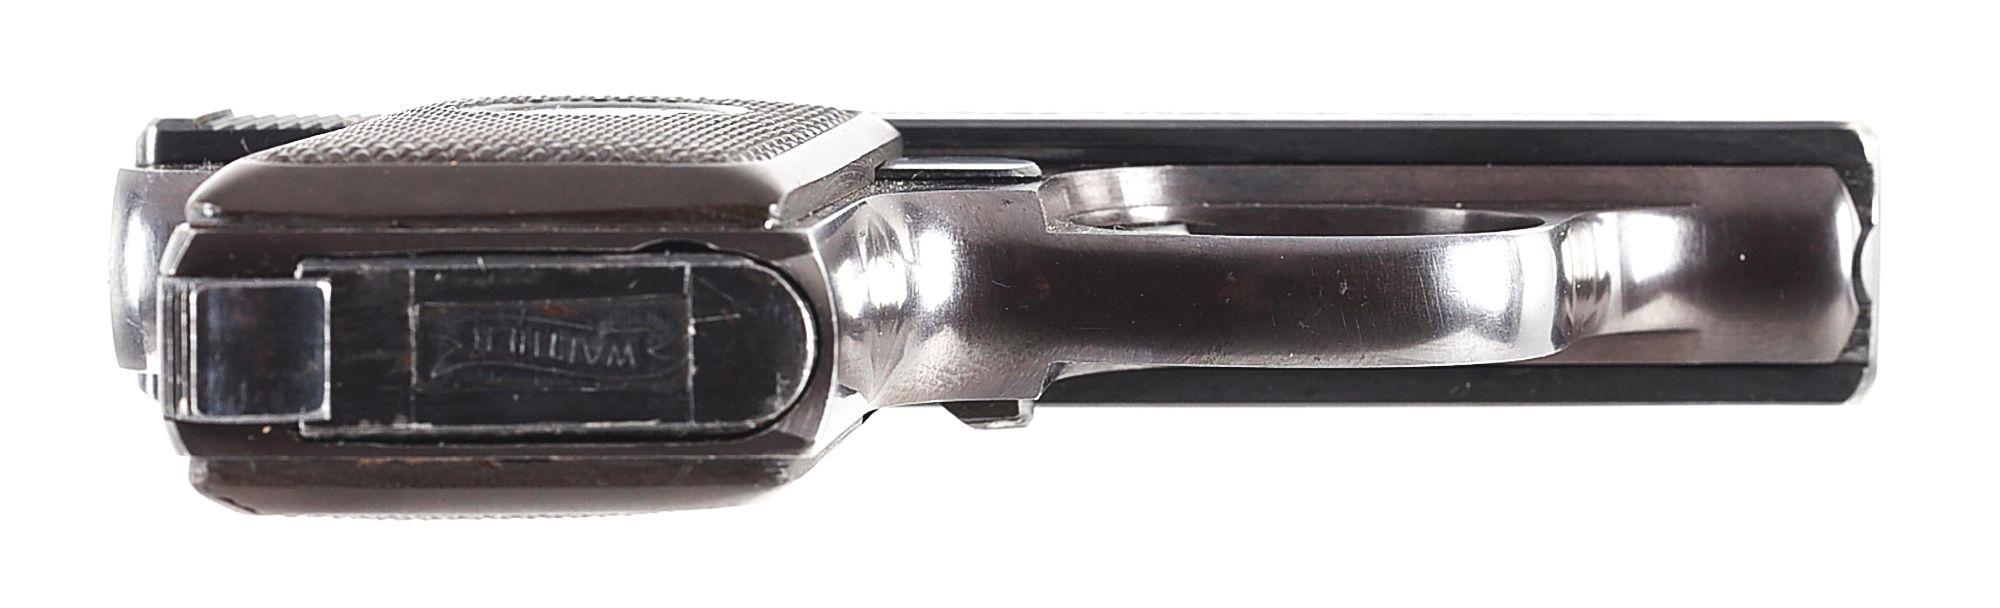 (C) FACTORY EMBELLISHED WALTHER MODEL 9B .25 ACP SEMI-AUTOMATIC PISTOL.